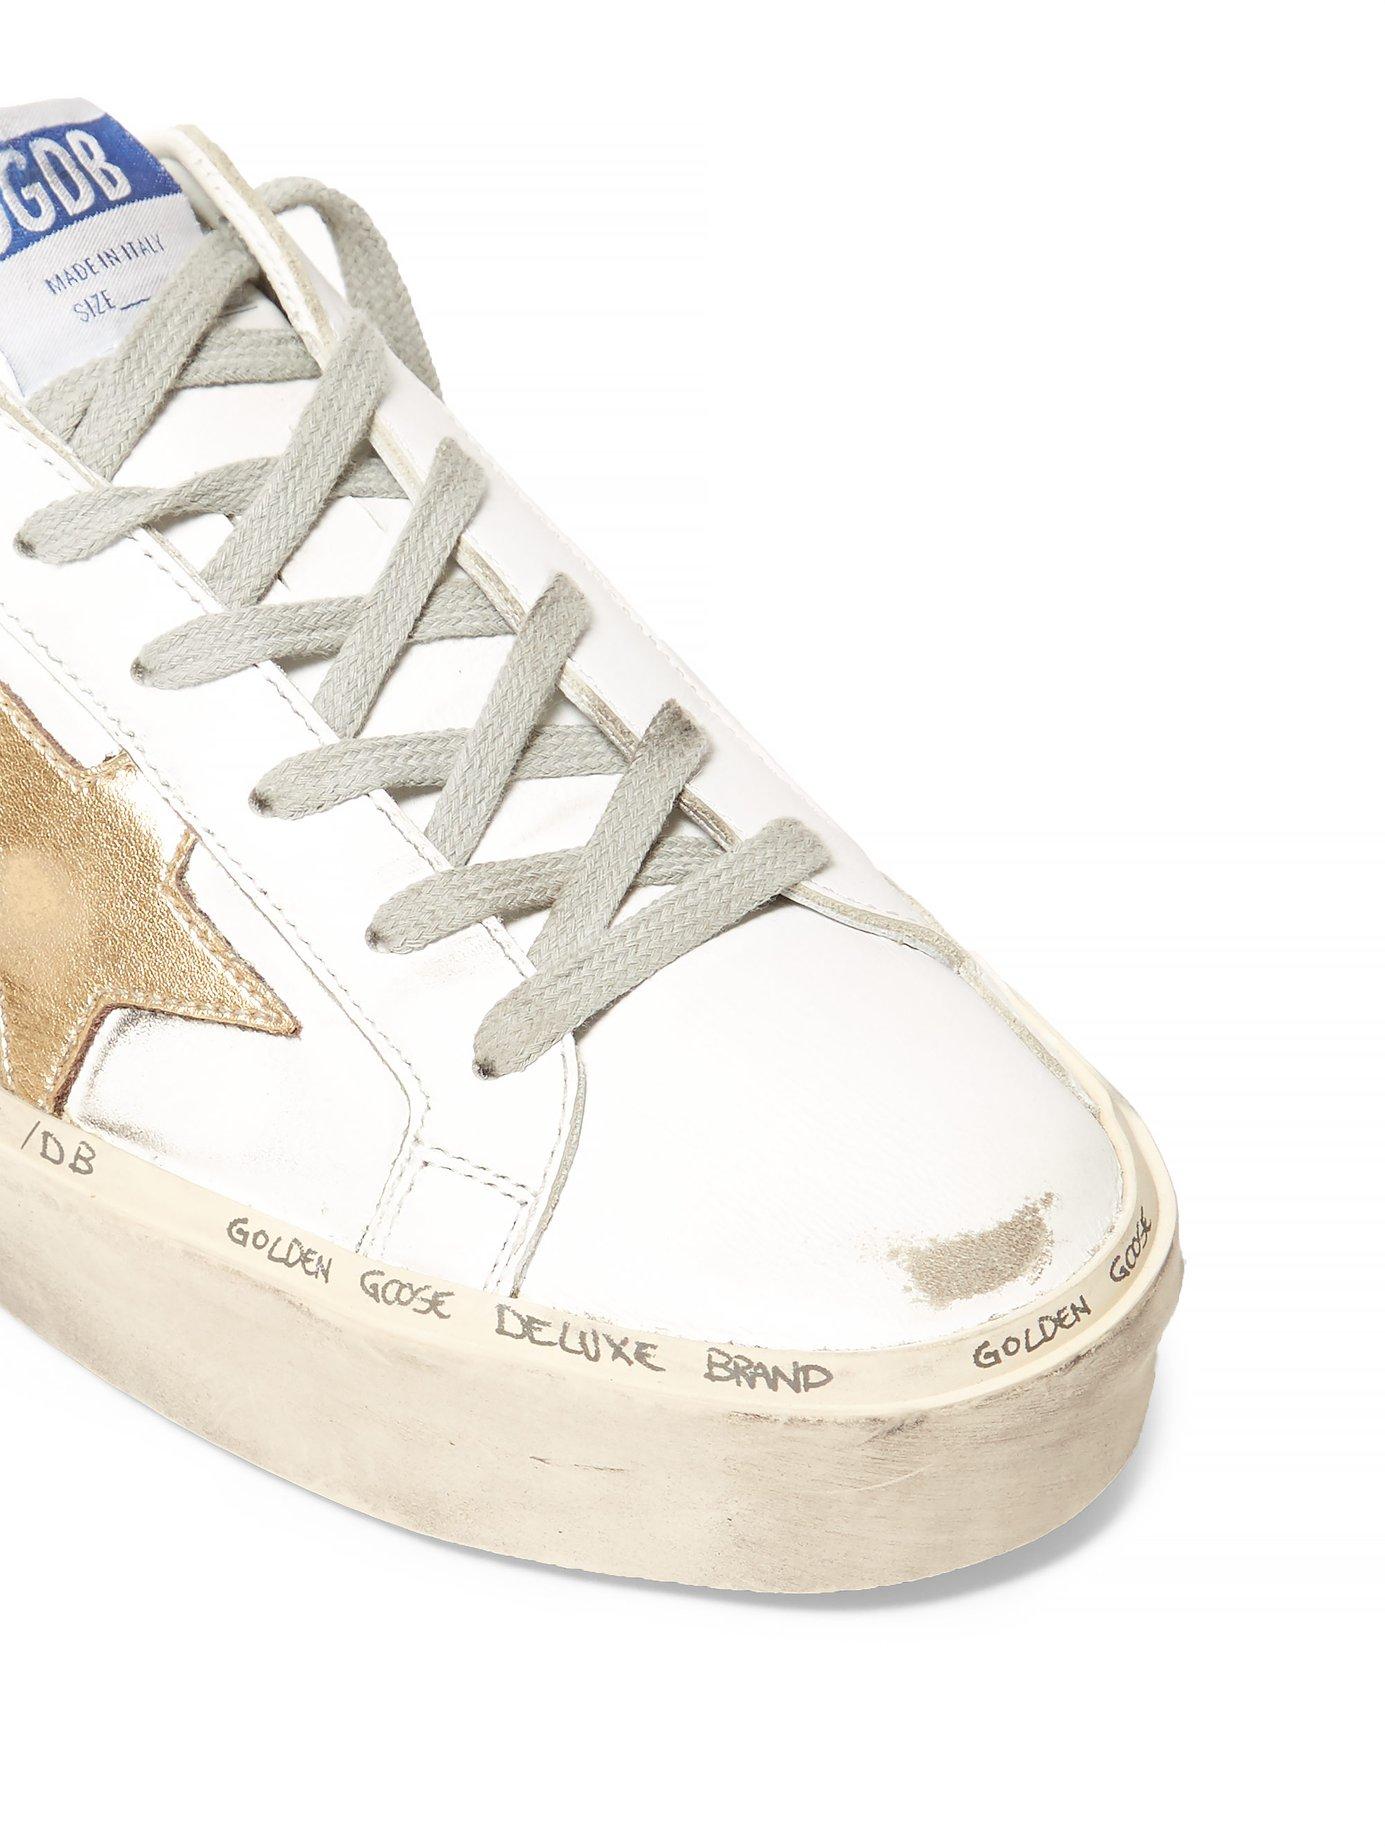 Golden Goose Deluxe Brand Hi Star Platform Leather Trainers in White ...